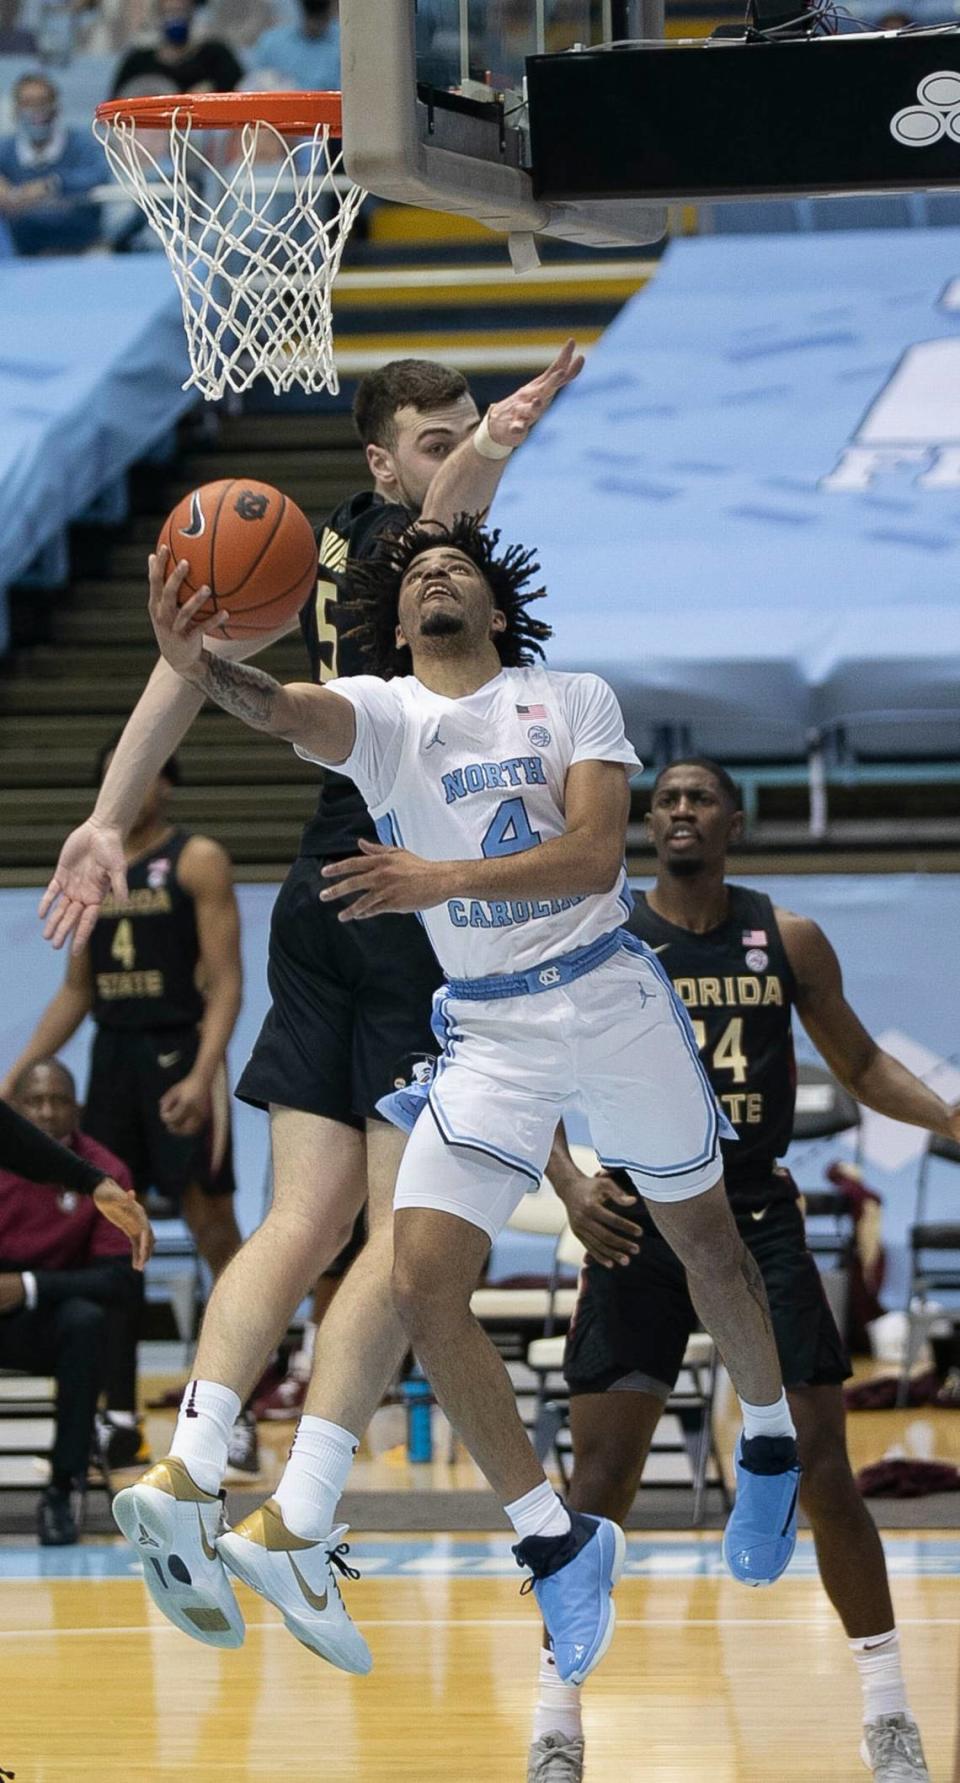 North Carolina’s R.J. Davis (4) breaks to the basket past Florida State’s Balsa Koprivica (5) during the first half on Saturday, February 27, 2021 in Chapel Hill, N.C.